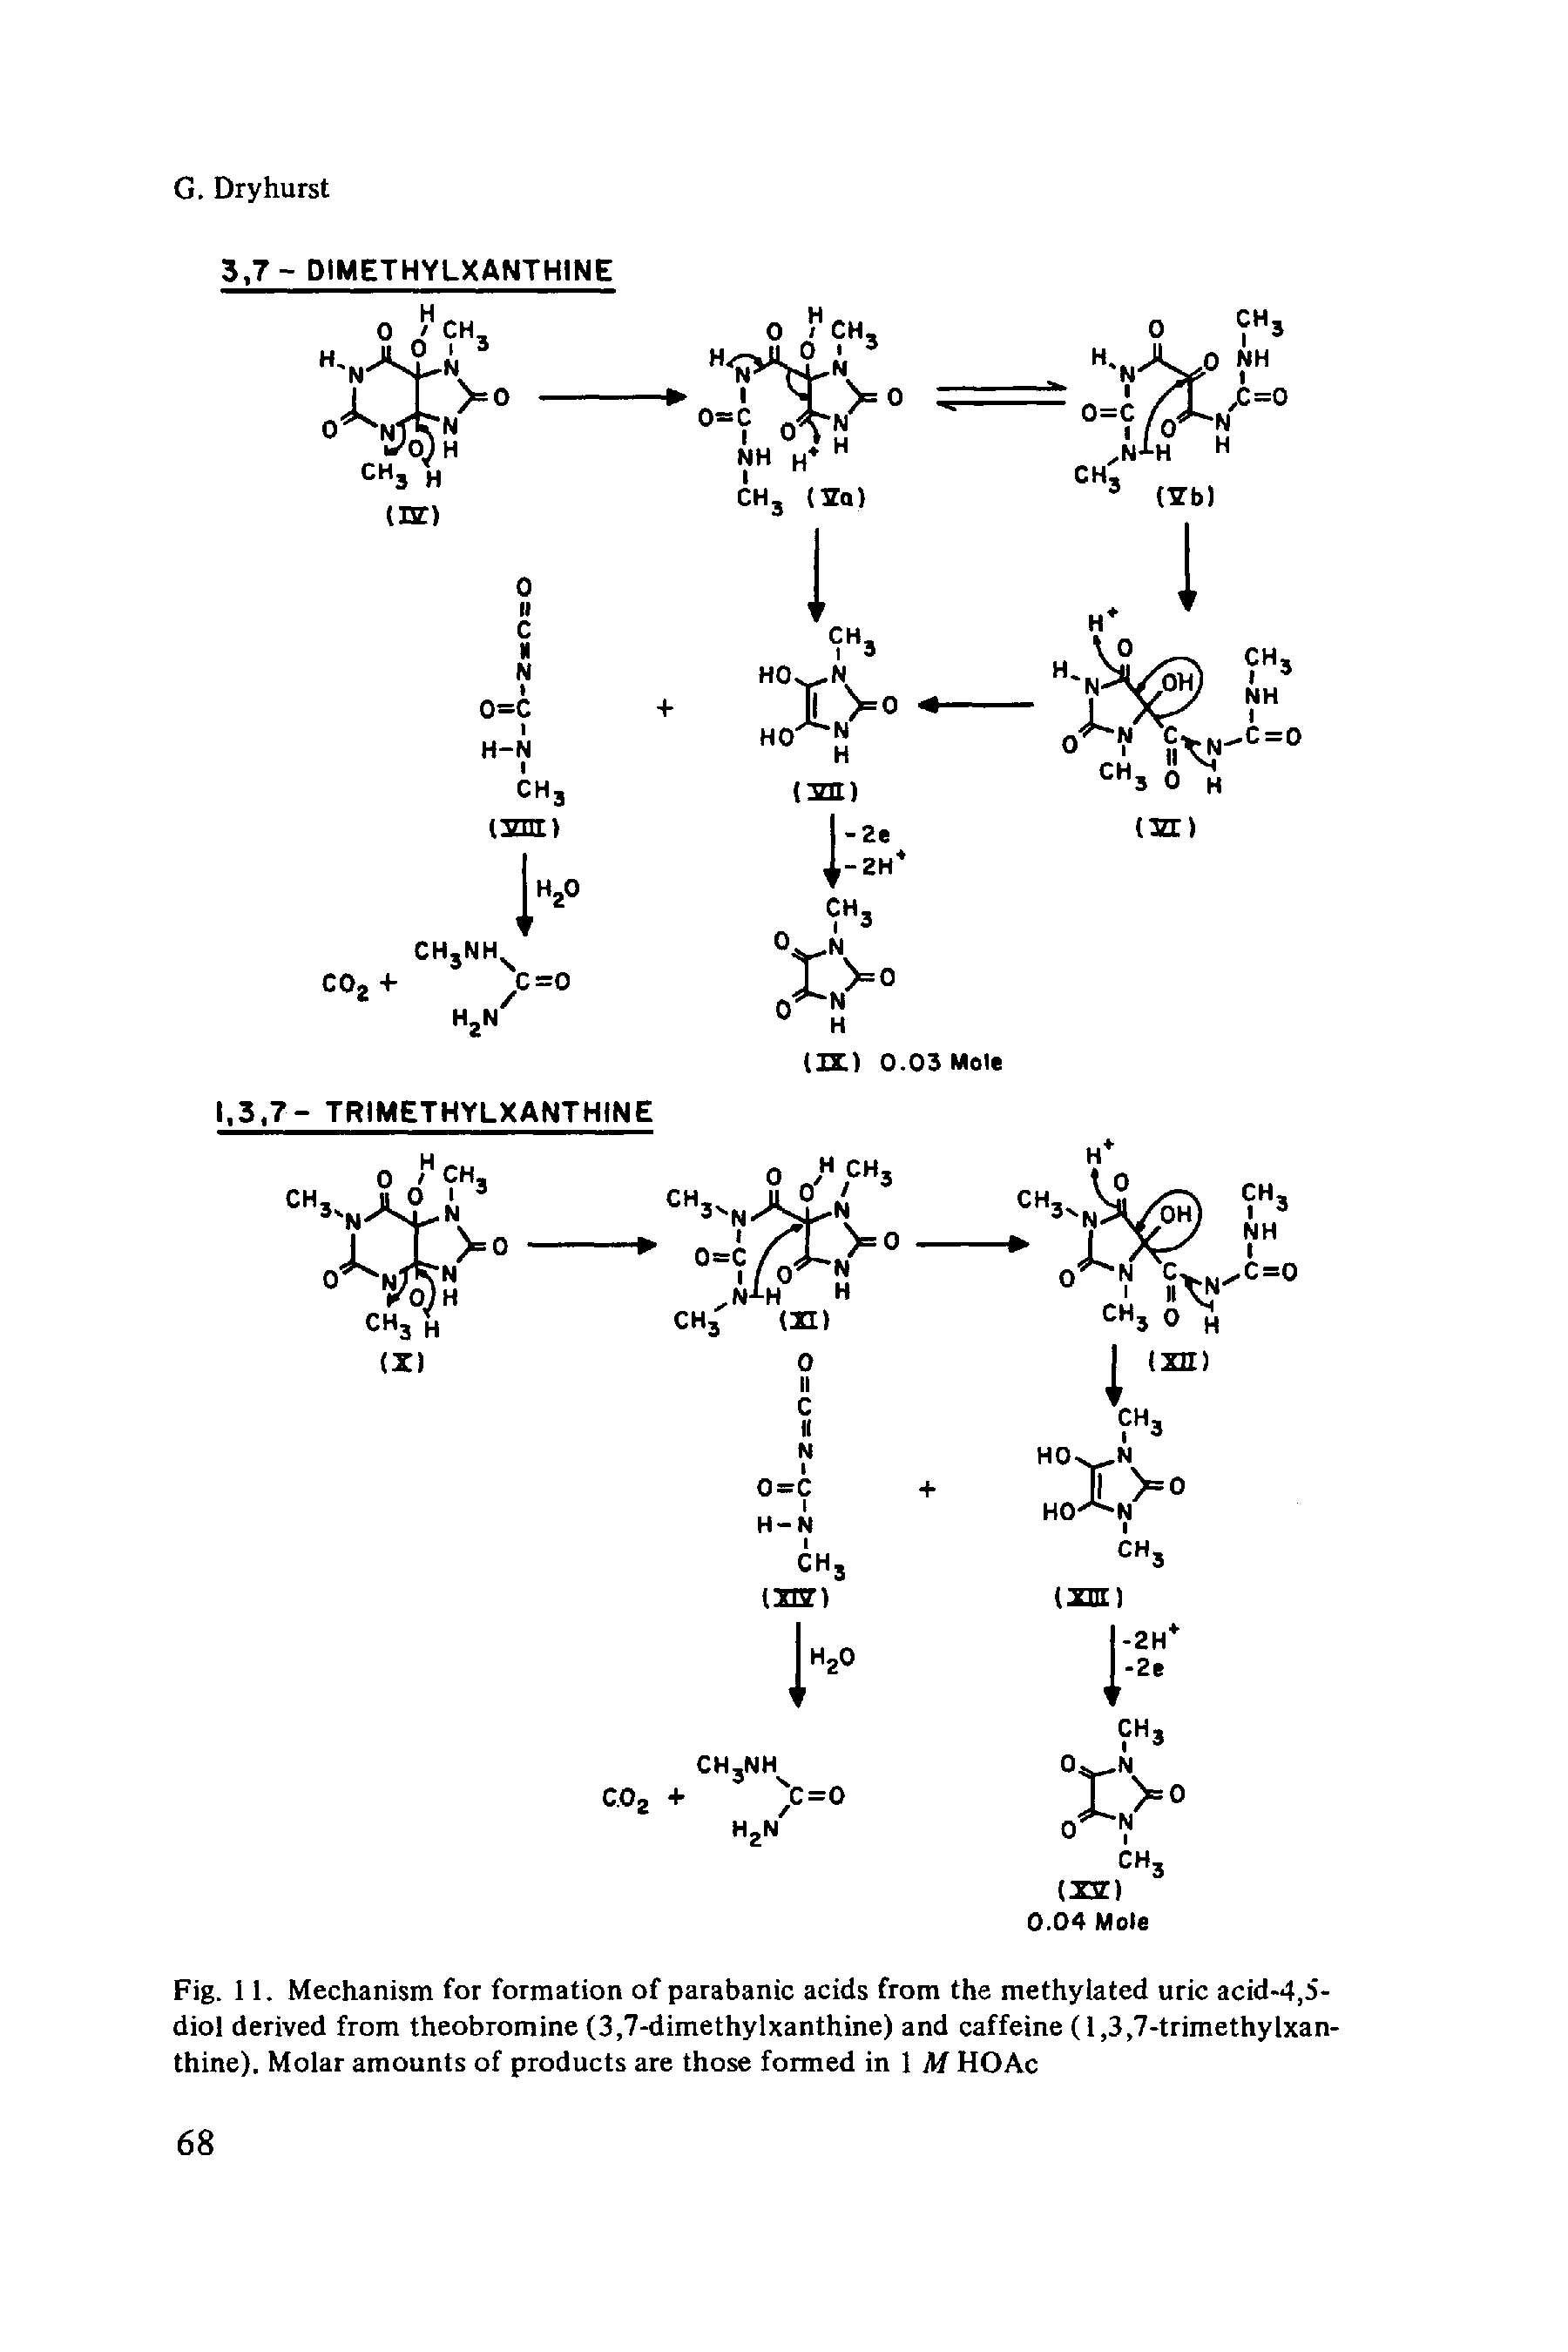 Fig. 11. Mechanism for formation of parabanic acids from the methylated uric acid-4,5-diol derived from theobromine (3,7-dimethylxanthine) and caffeine (1,3,7-trimethylxan-thine). Molar amounts of products are those formed in 1 M HOAc...